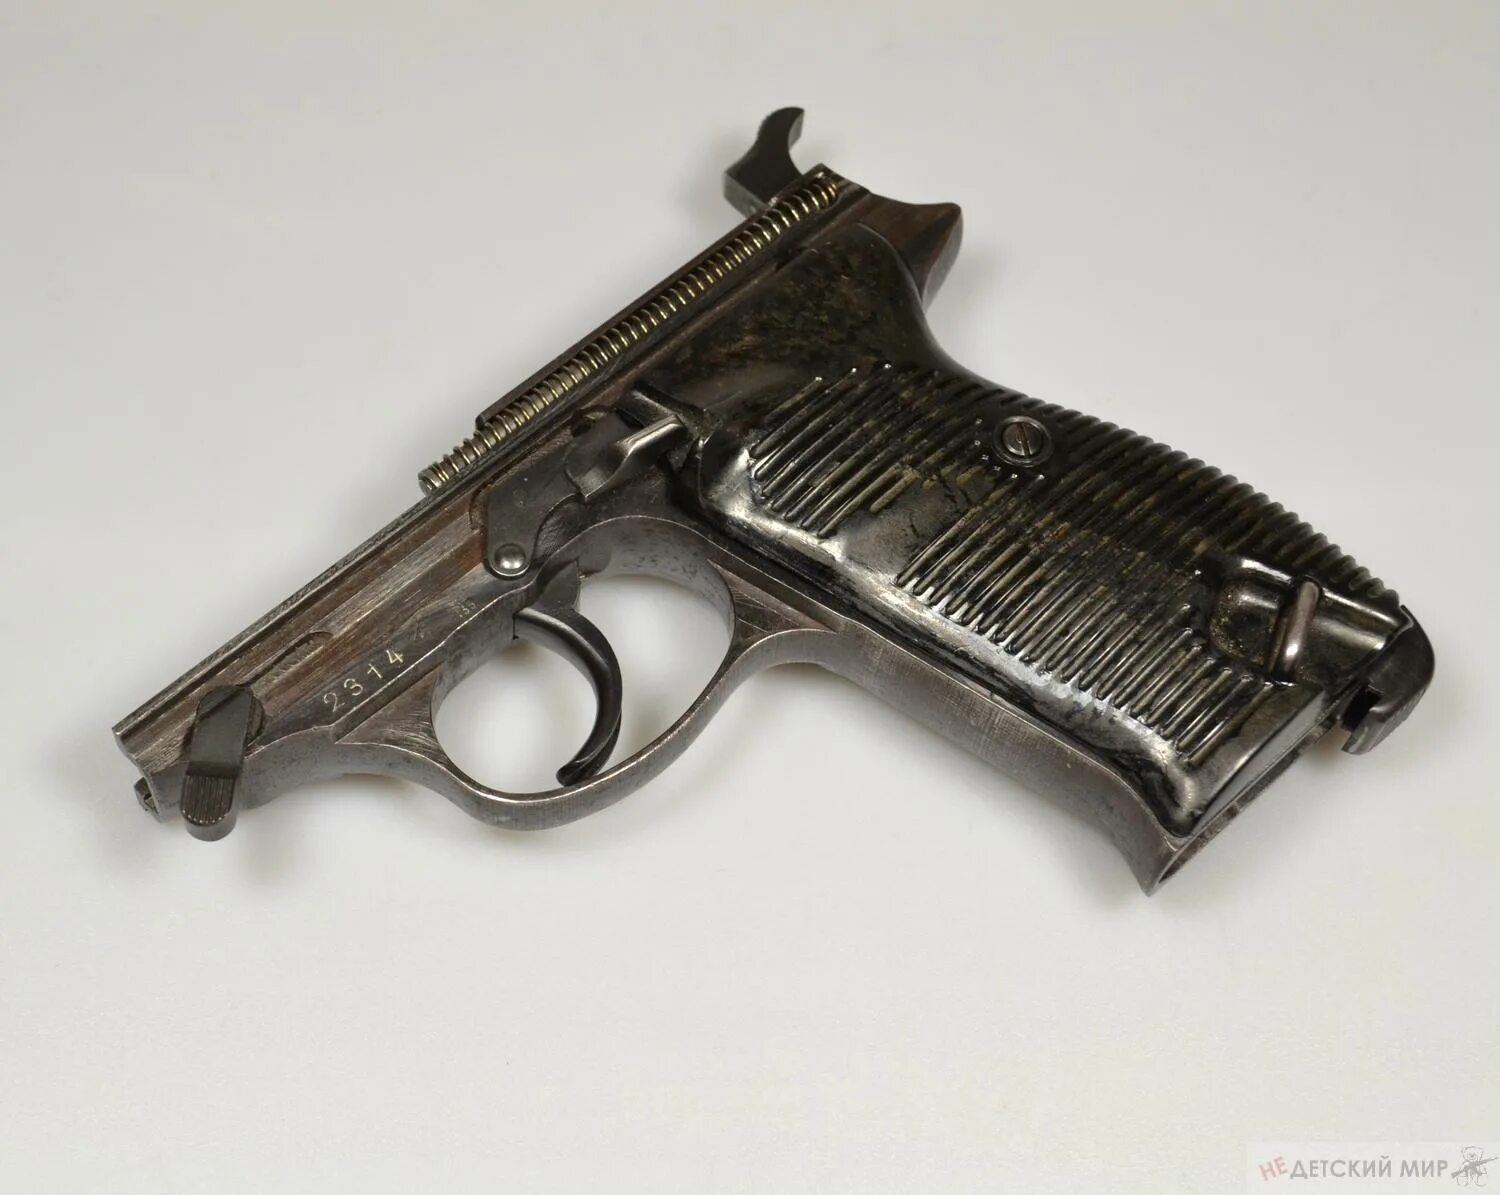 К 11 п 38. Walther p38 клейма. Walther p38 СХП.